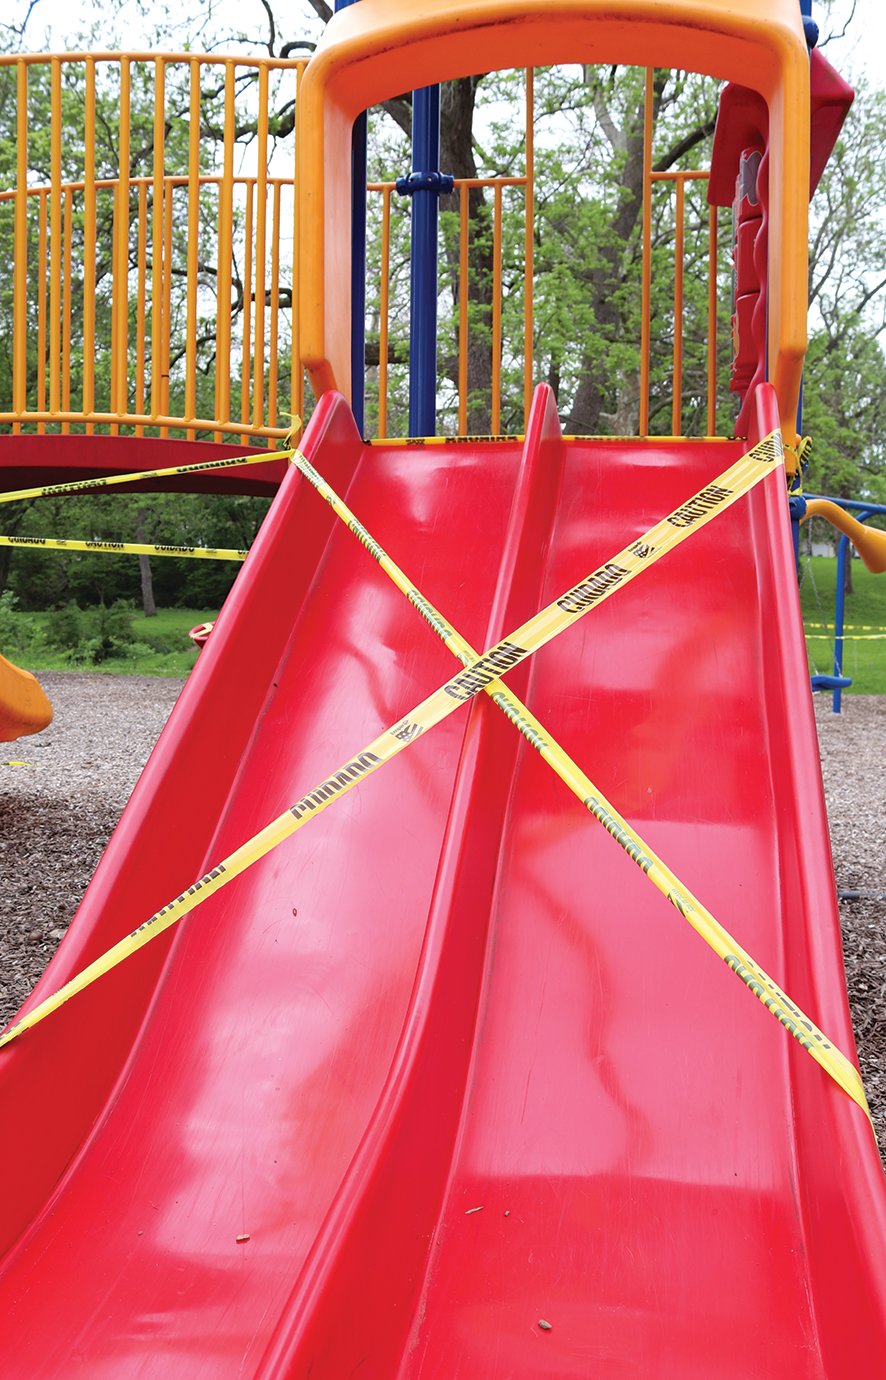 Slides, swing sets and other playground equipment stand dormant under caution tape Monday at Milligan Park. Though most park services have reopened, high-contact equipment such as playgrounds remained off limits until further notice.